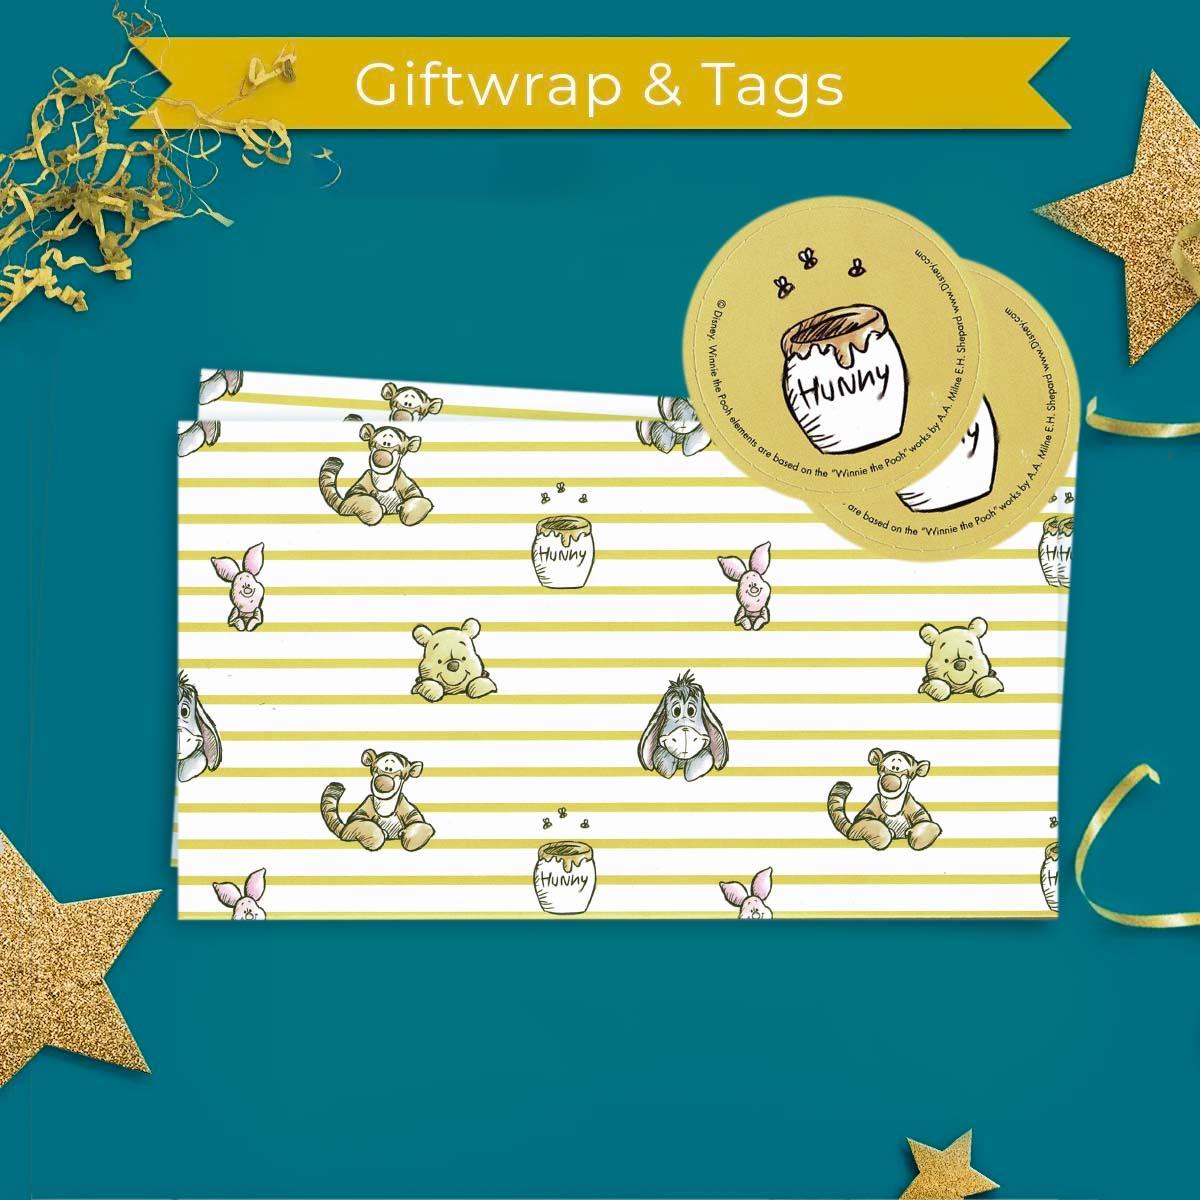 Giftwrap - Disney Winnie The Pooh Front Image